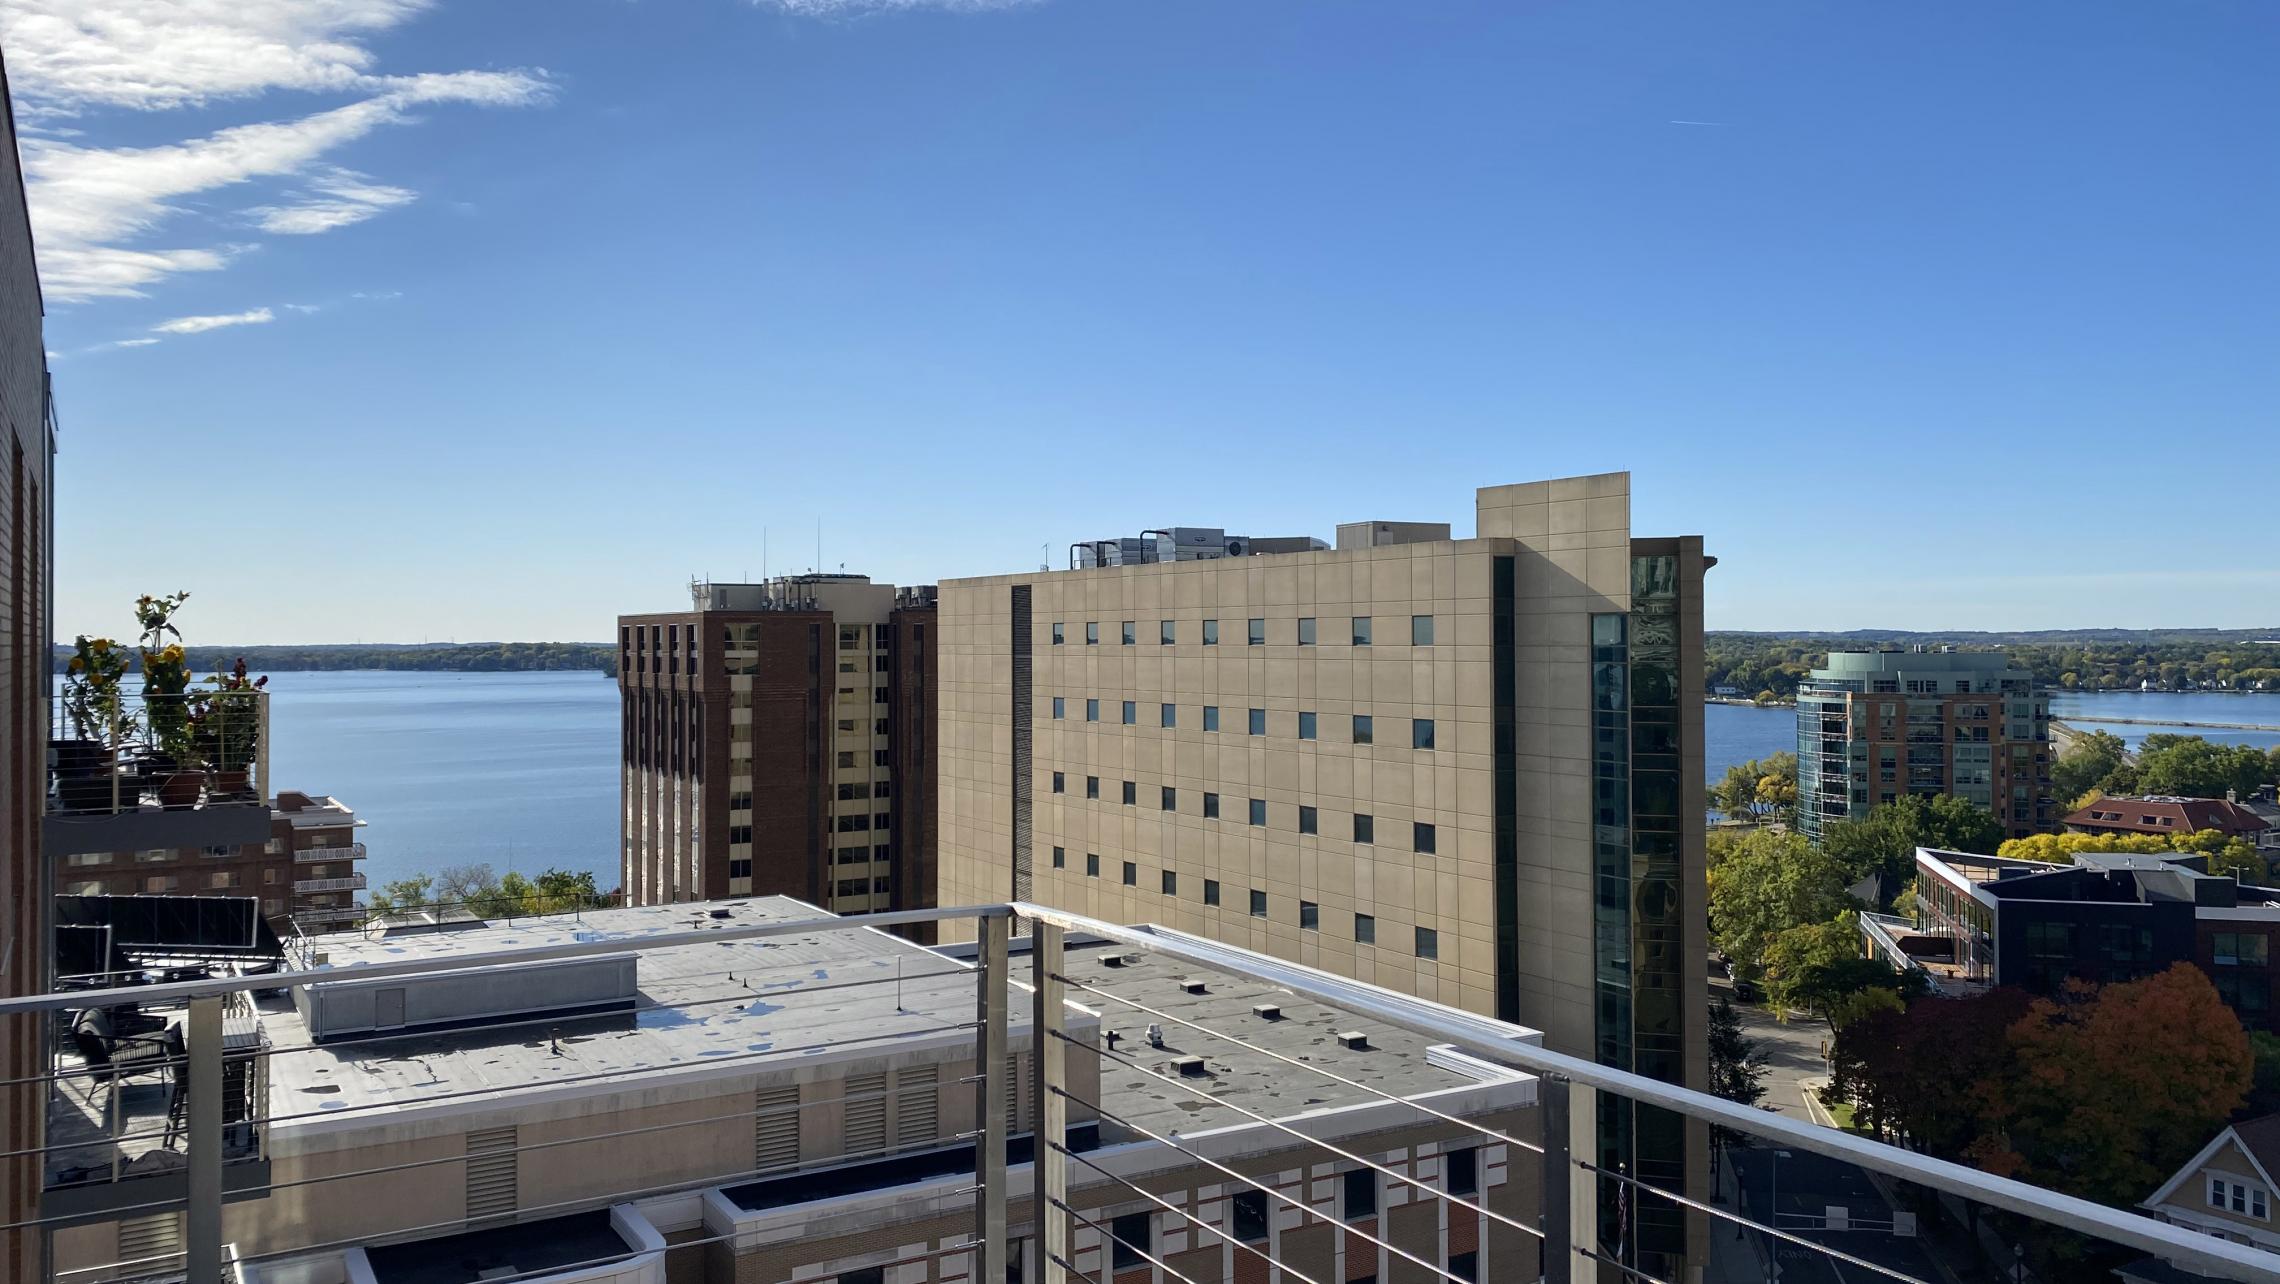 The-Pressman-Apartments-Two-Bedroom-912-Modern-Upscale-Luxury-Top-Floor-Capitol-Lake-View-Balcony-Corner-Lifestyle-Downtown-Madison-Design-Concrete-Kithcen-Living-Dining-Windows-Dogs-Cats-Pets-Fitness-Lounge